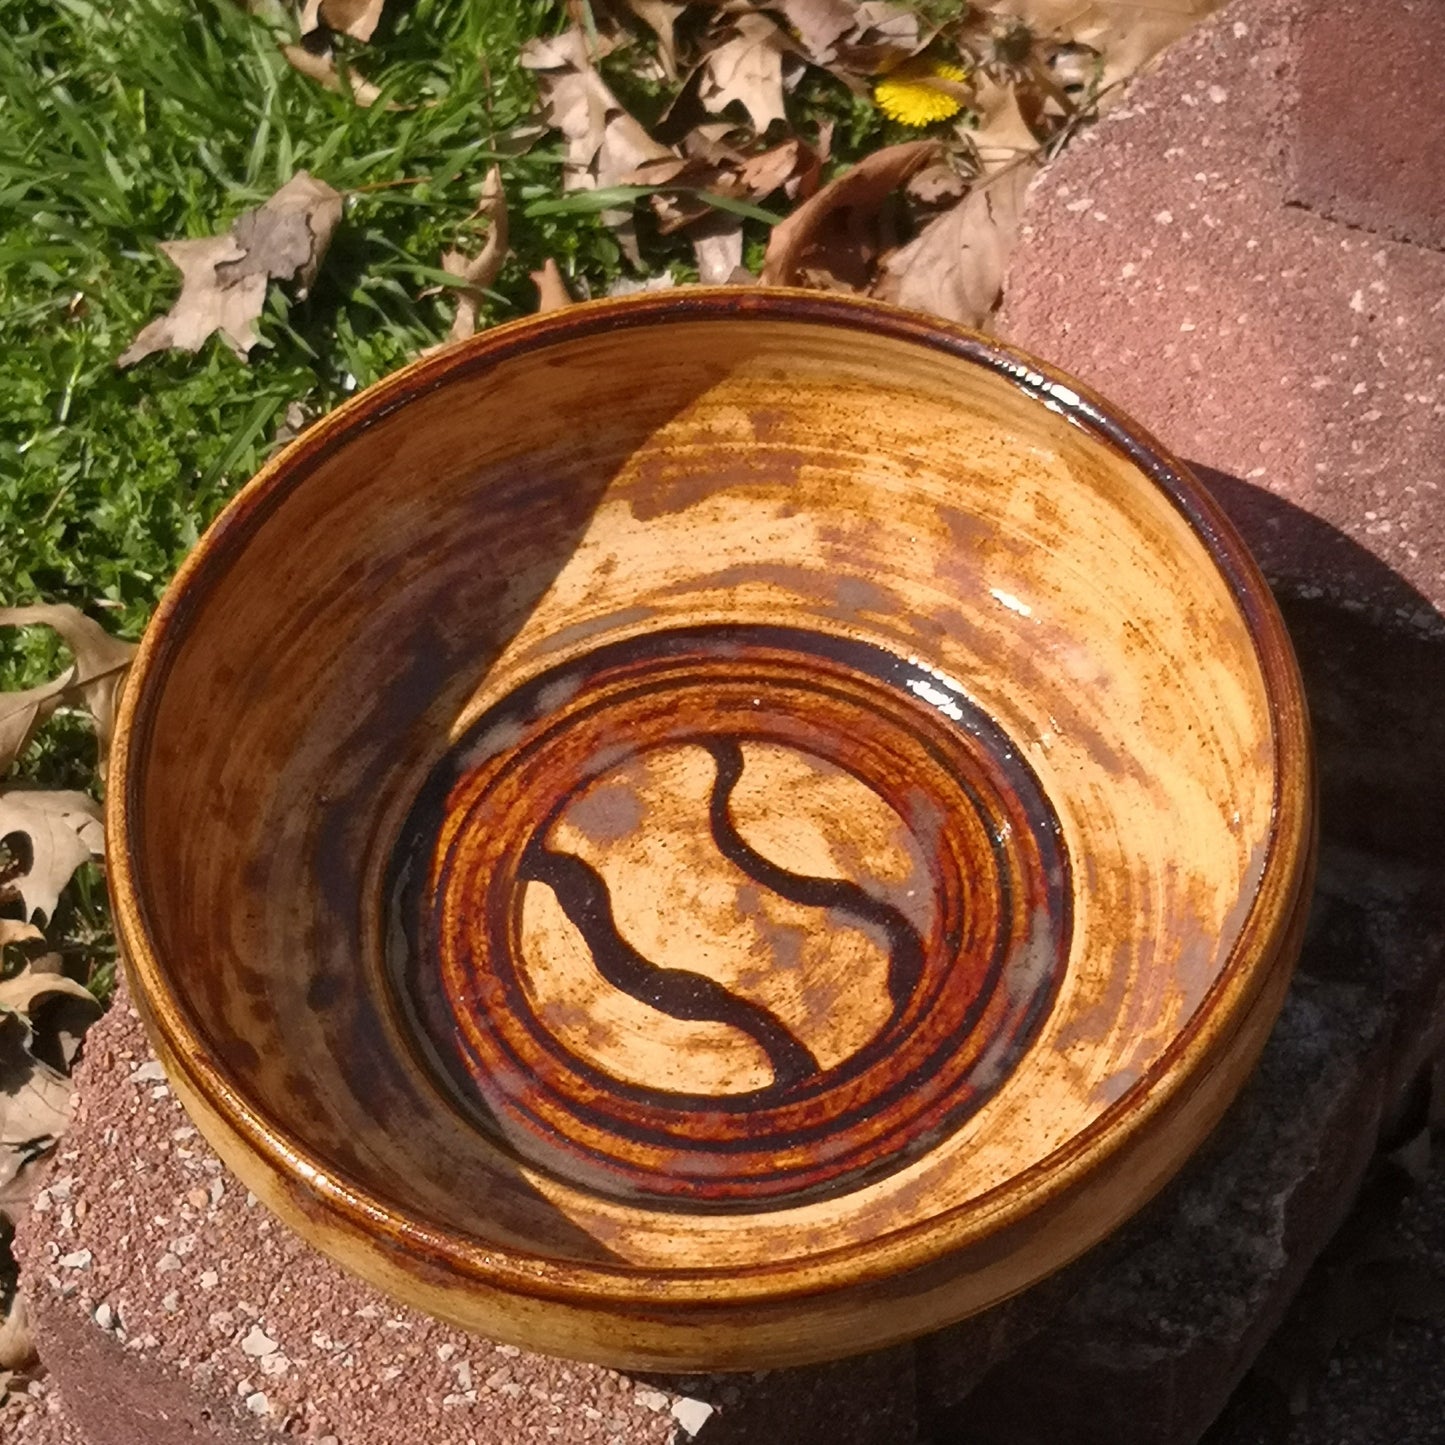 Big Yellow Bowl | Panther Pots by Ayden Krzmarzick